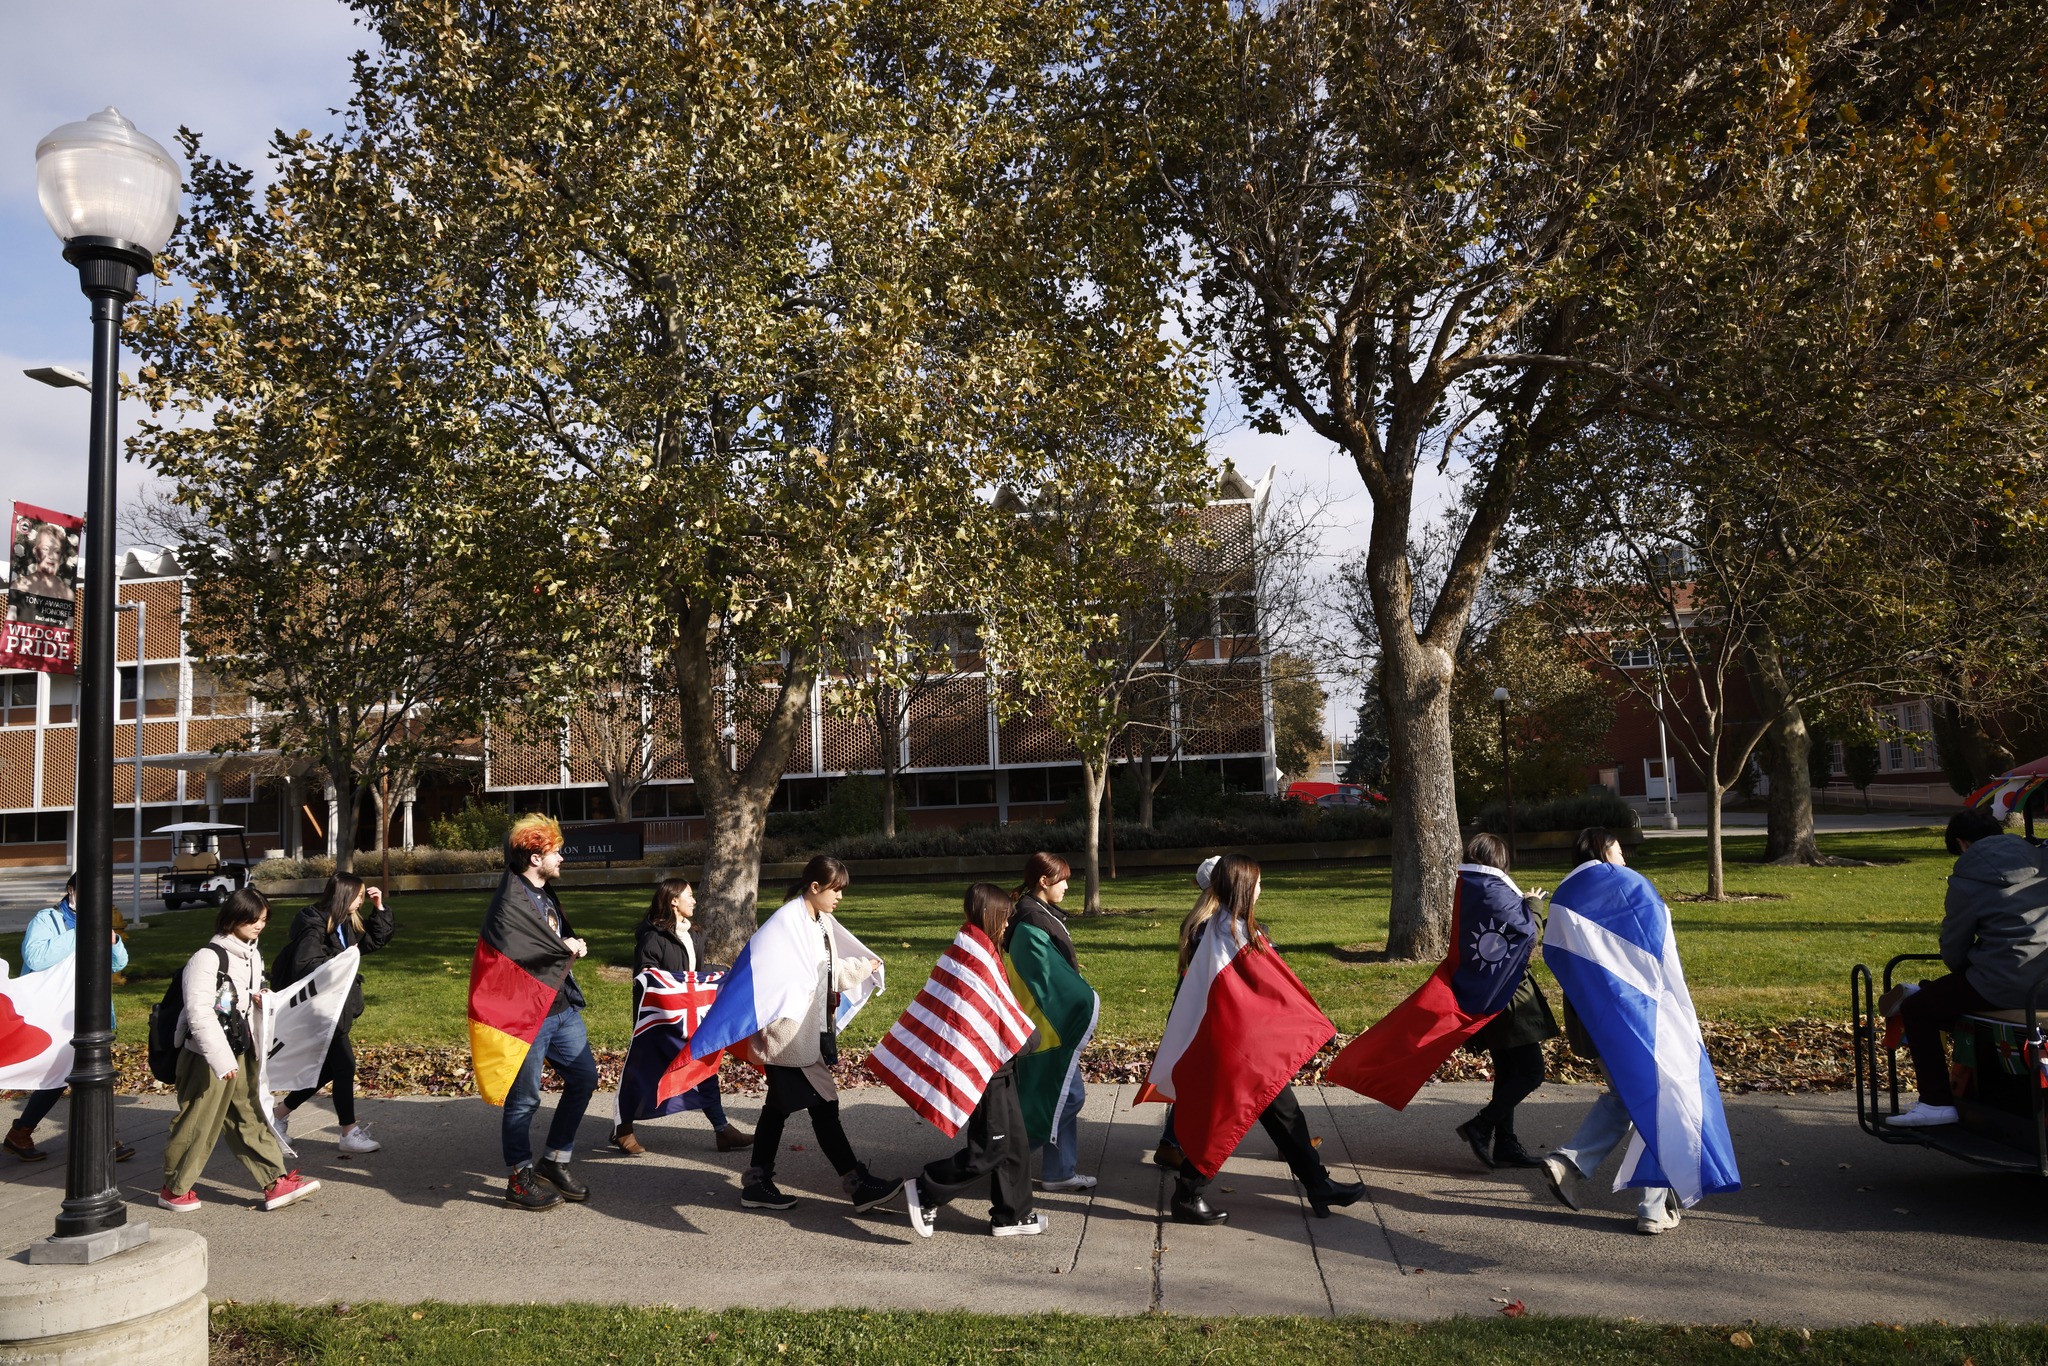 Parade of Flags. In celebration of international education week, students, staff and faculty walk around campus holding flags from around the world.